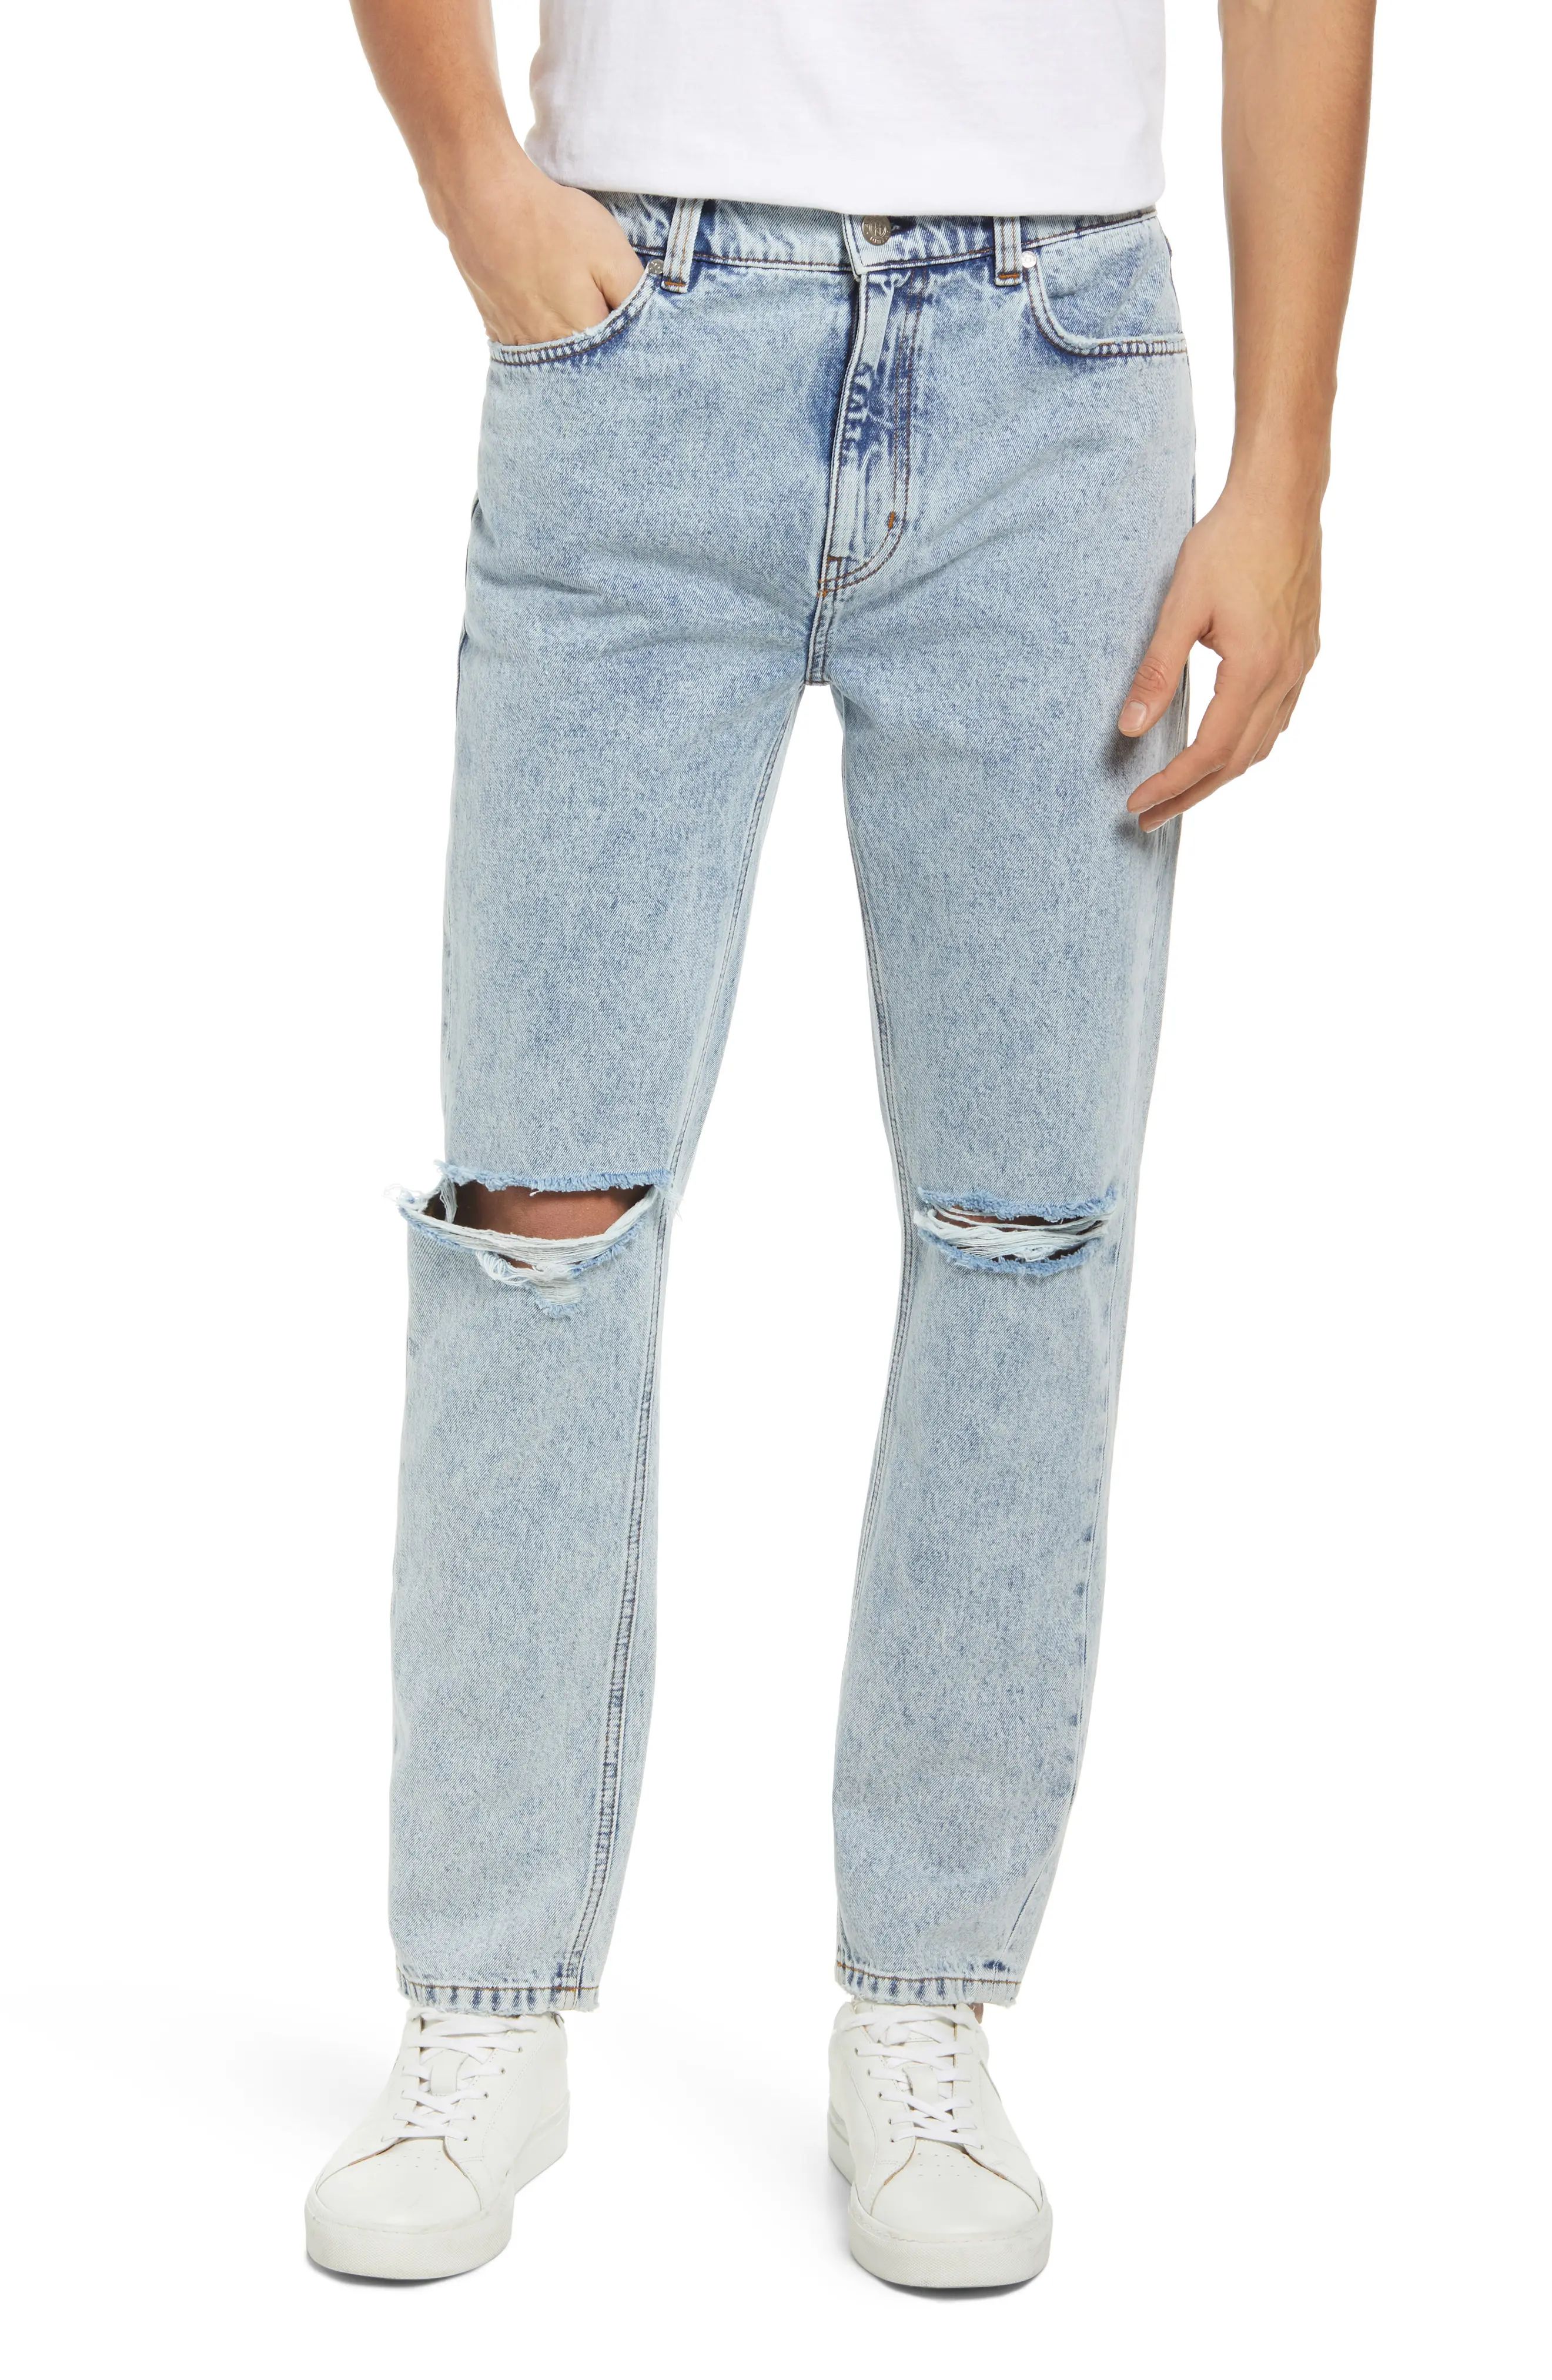 AMENDI Ake Ripped Slim Straight Leg Organic Cotton Jeans in Blue Memories at Nordstrom, Size 29 X 32 | Nordstrom